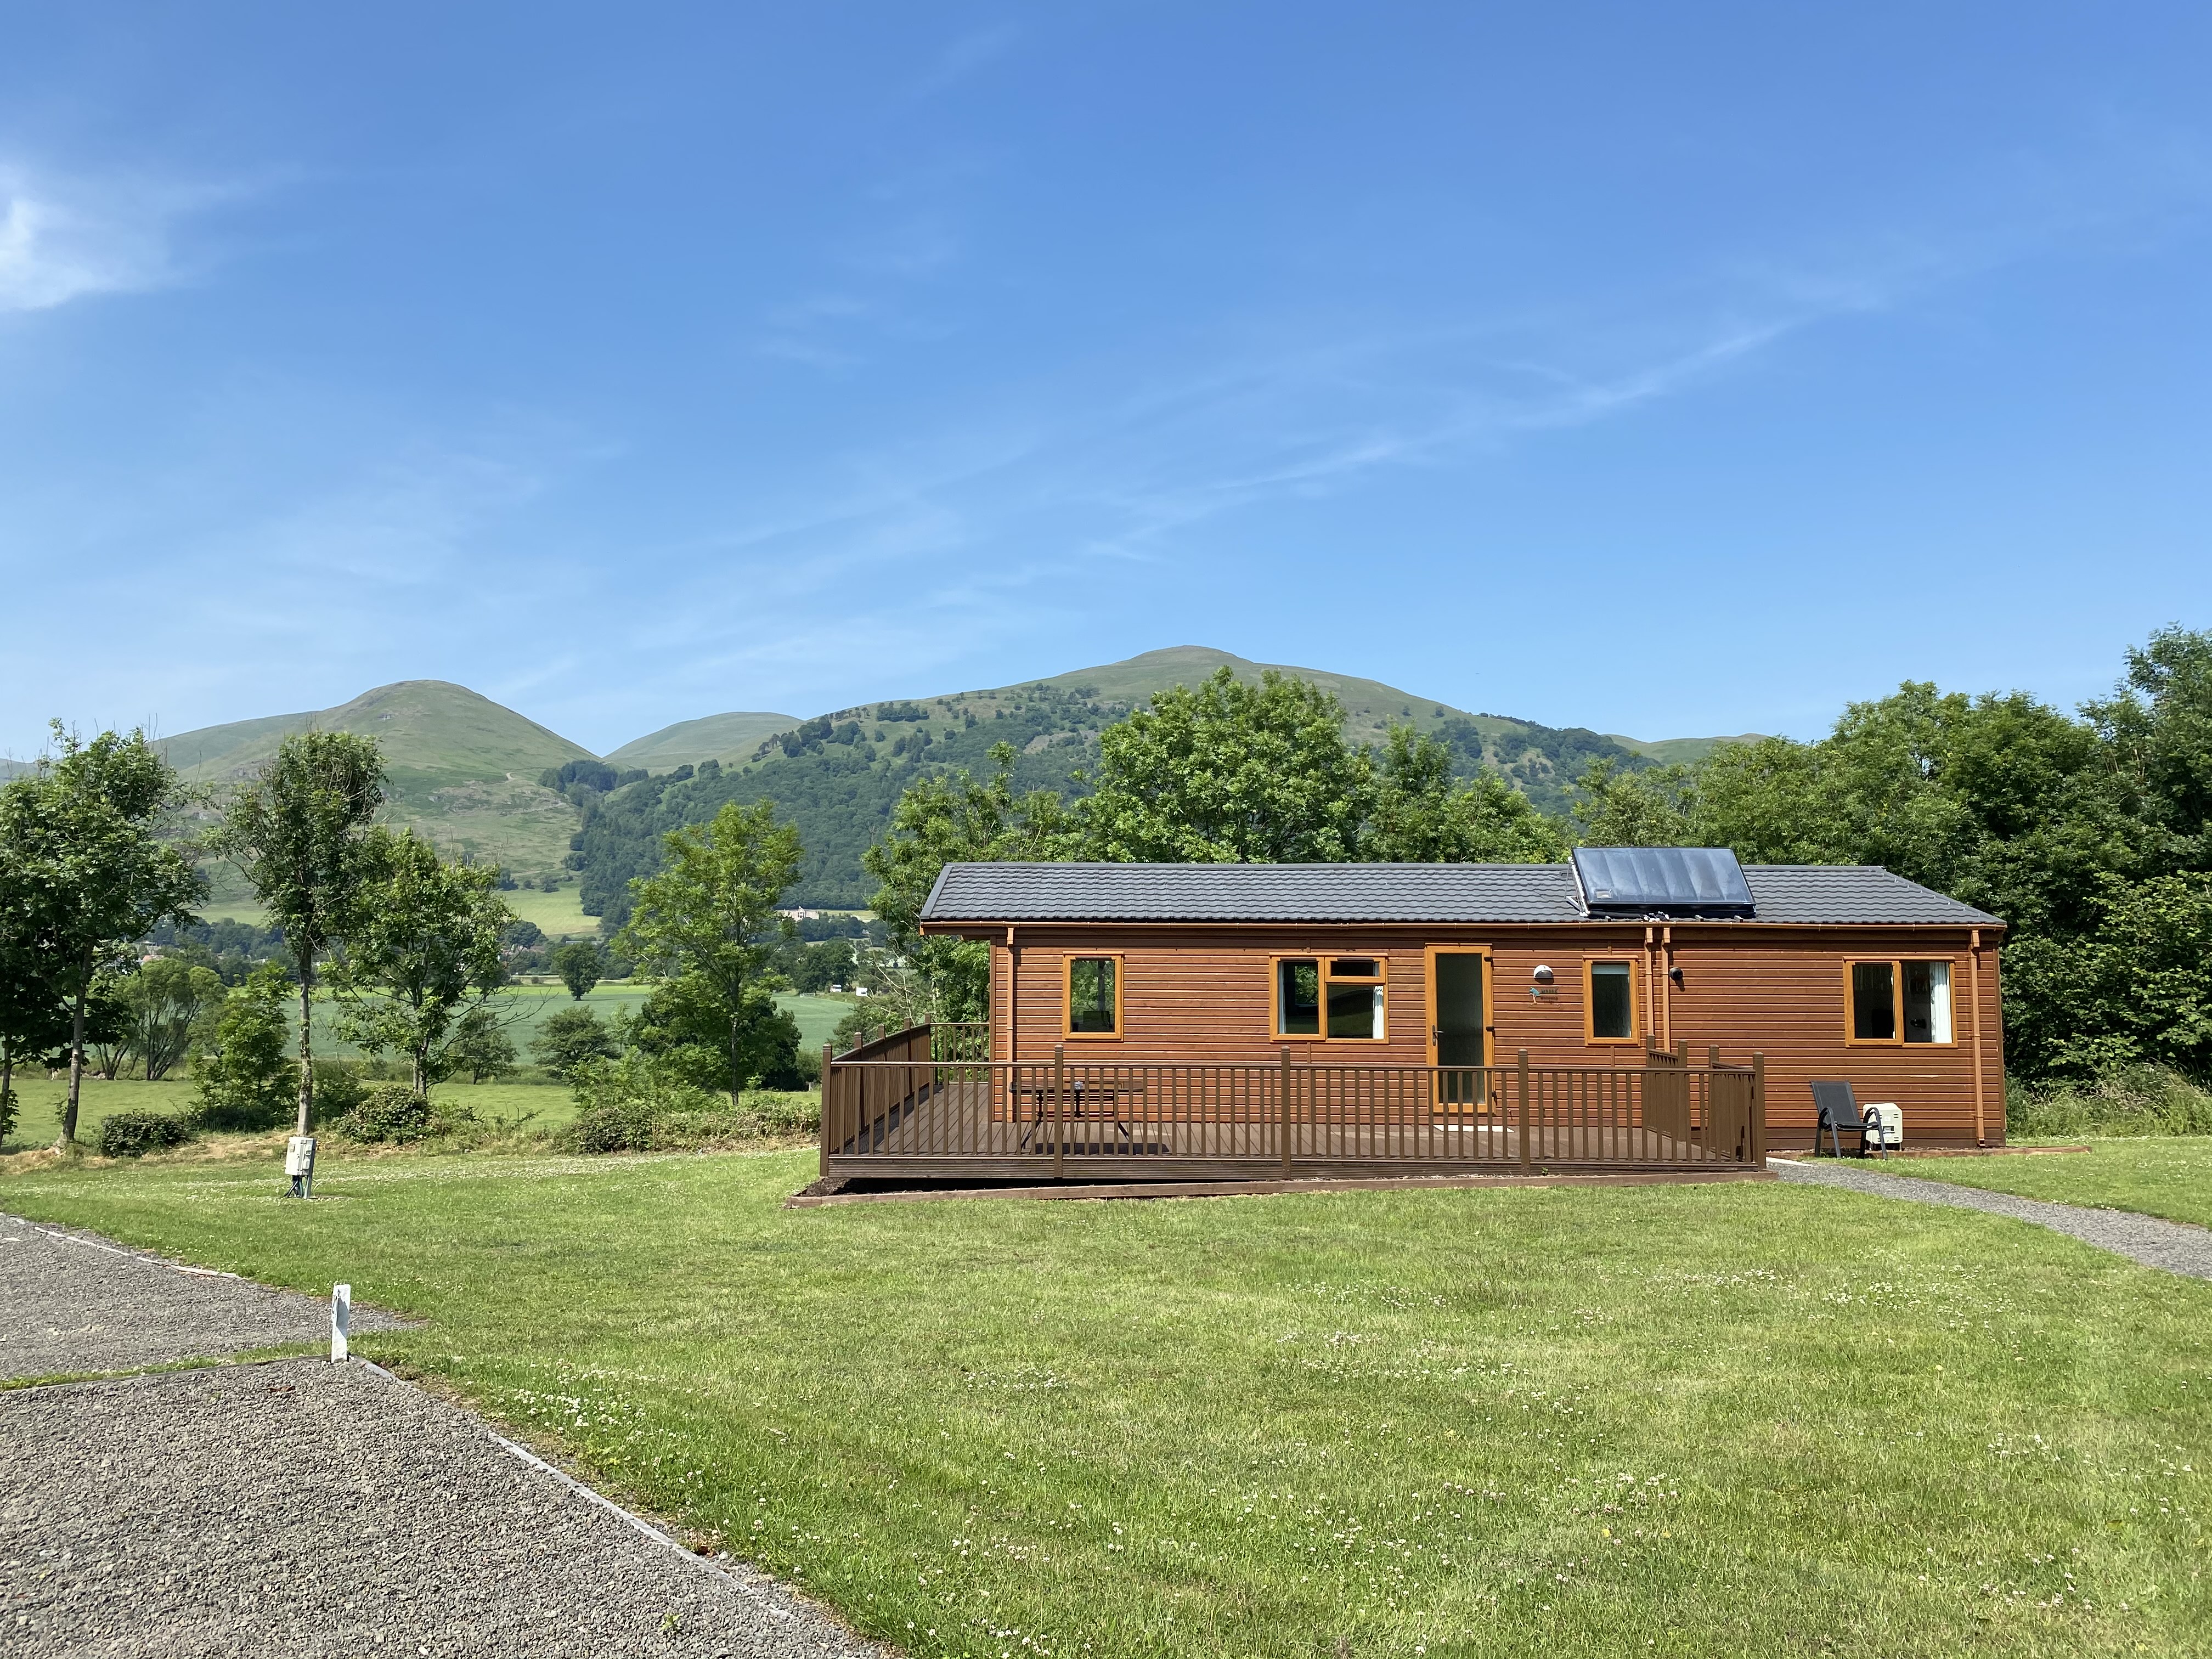 Lodges for hire